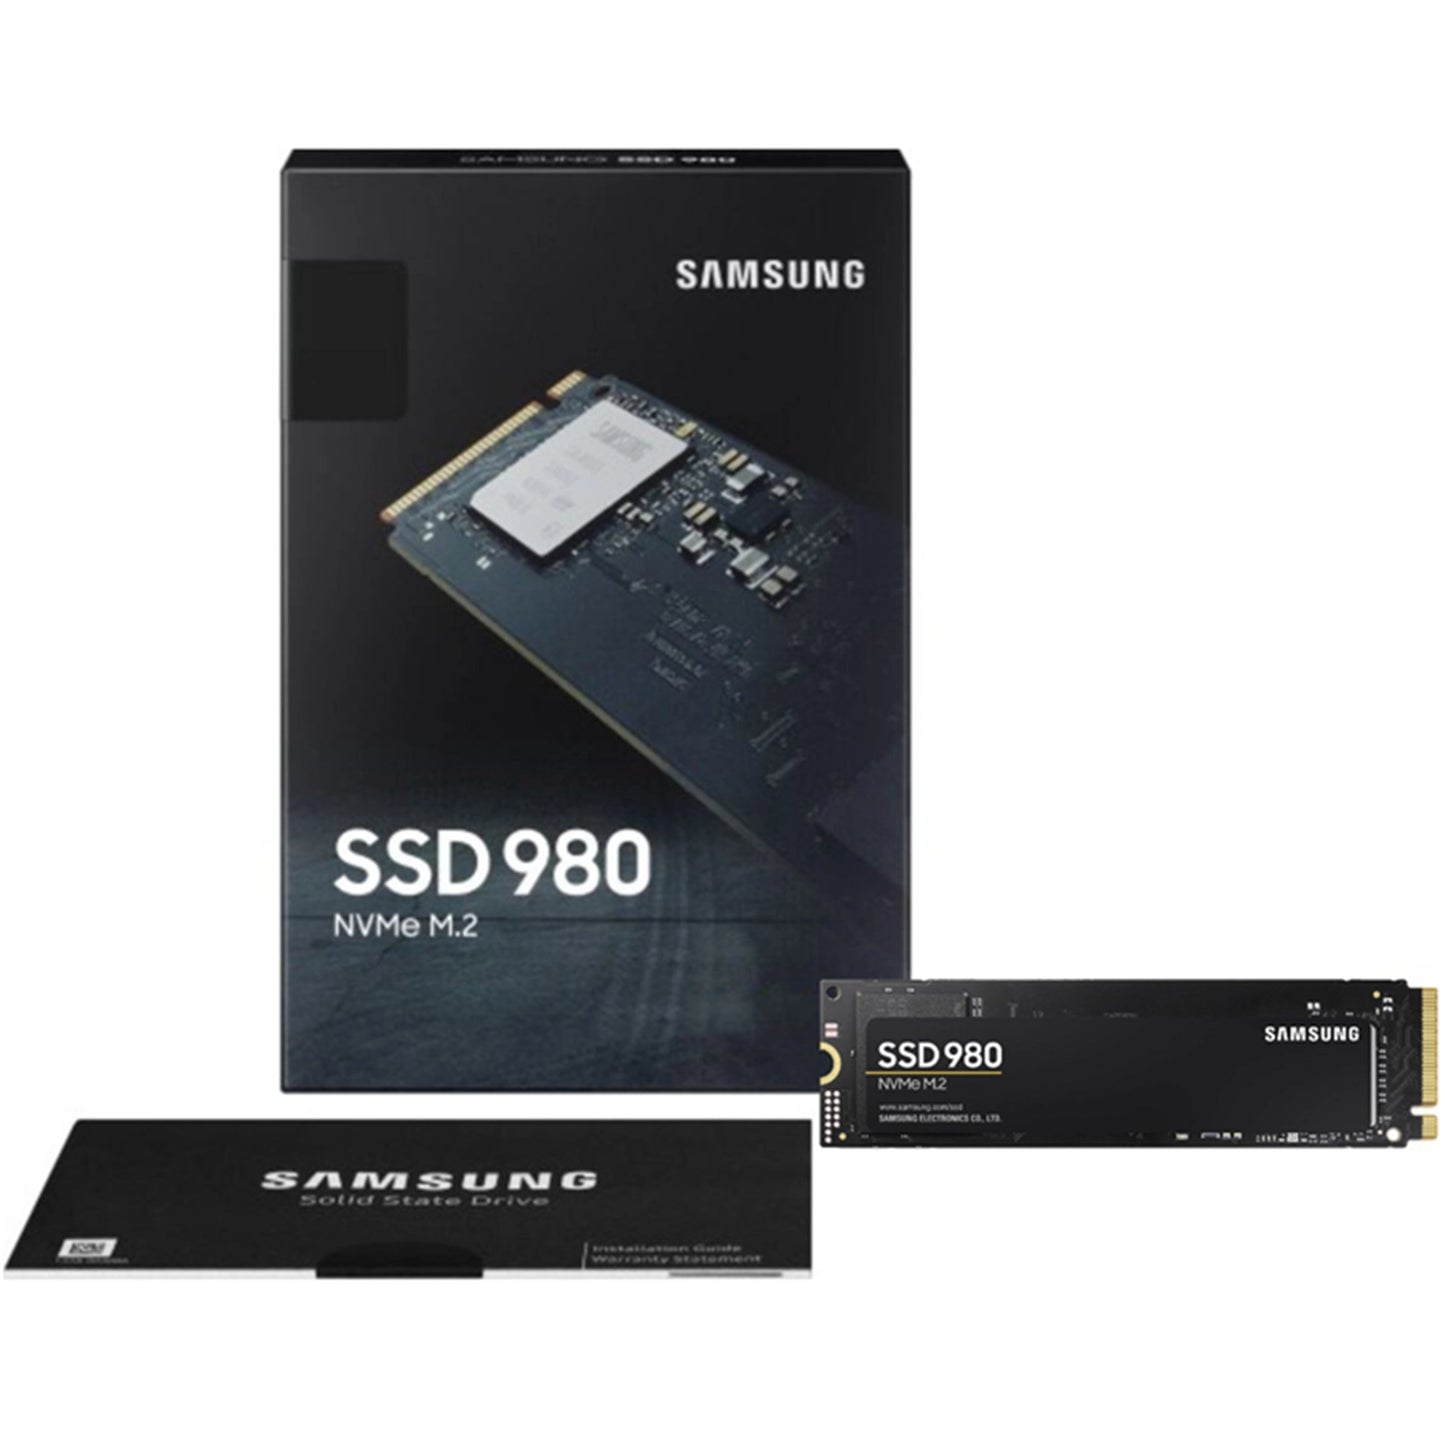 Samsung 980 1TB NVMe PCIe 3.0 M.2 SSD Read up to 3500MB/s , Write up to 3000MB/s ,500K/480K IOPS